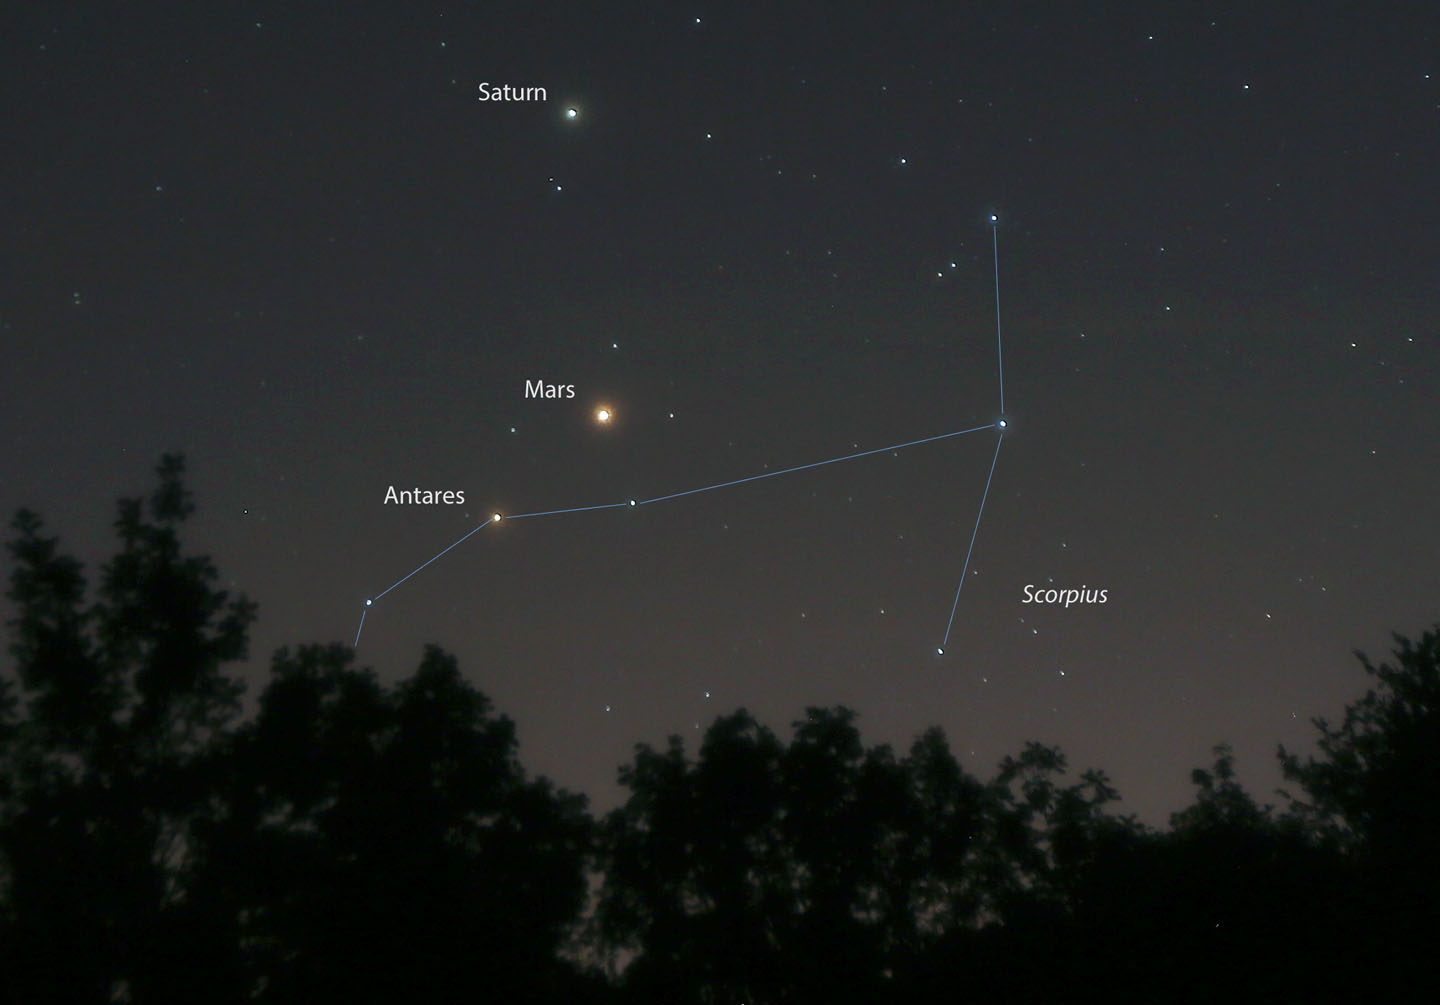 Saturn, Mars and Antares are shown on Sunday night August 21 two nights before their lineup. Mars is still far and away the brightest object in the bunch at magnitude -0.5. Details: 35mm lens, f/2.8, ISO 400, 10 seconds. Credit: Bob King